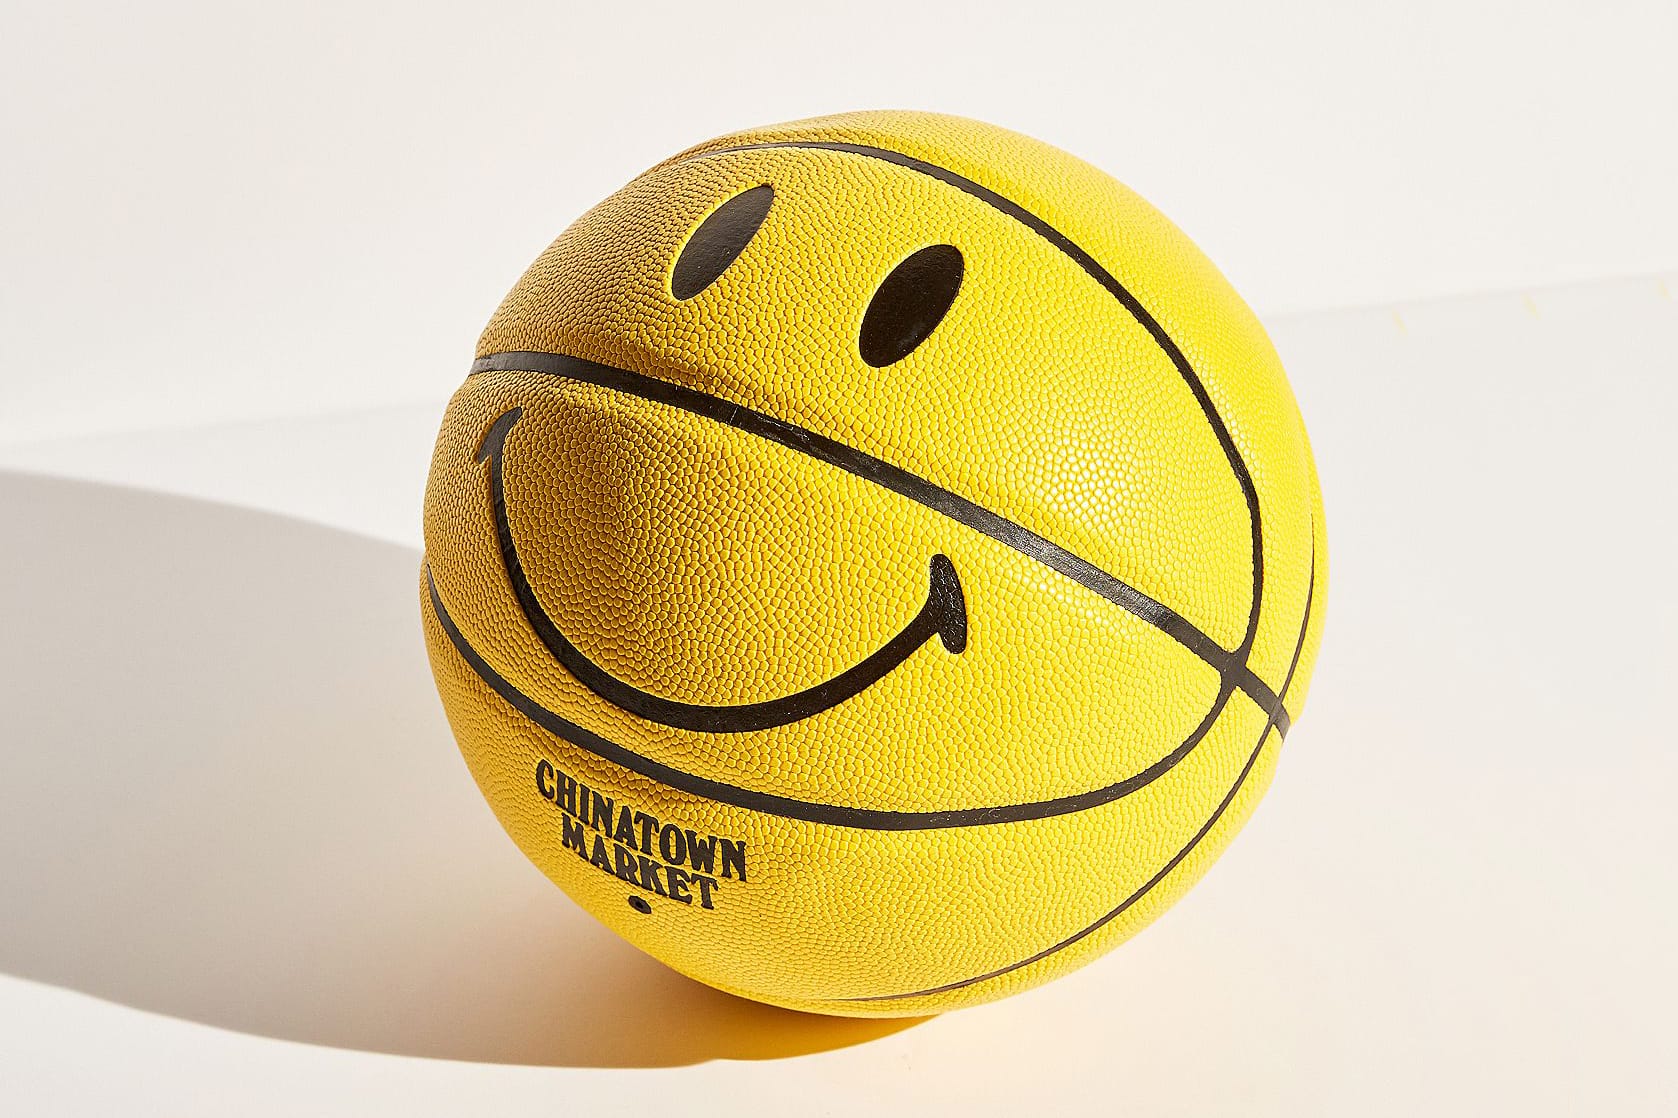 Nice Smiley Basketball With Smiling face For School Training Sports Game Yellow 